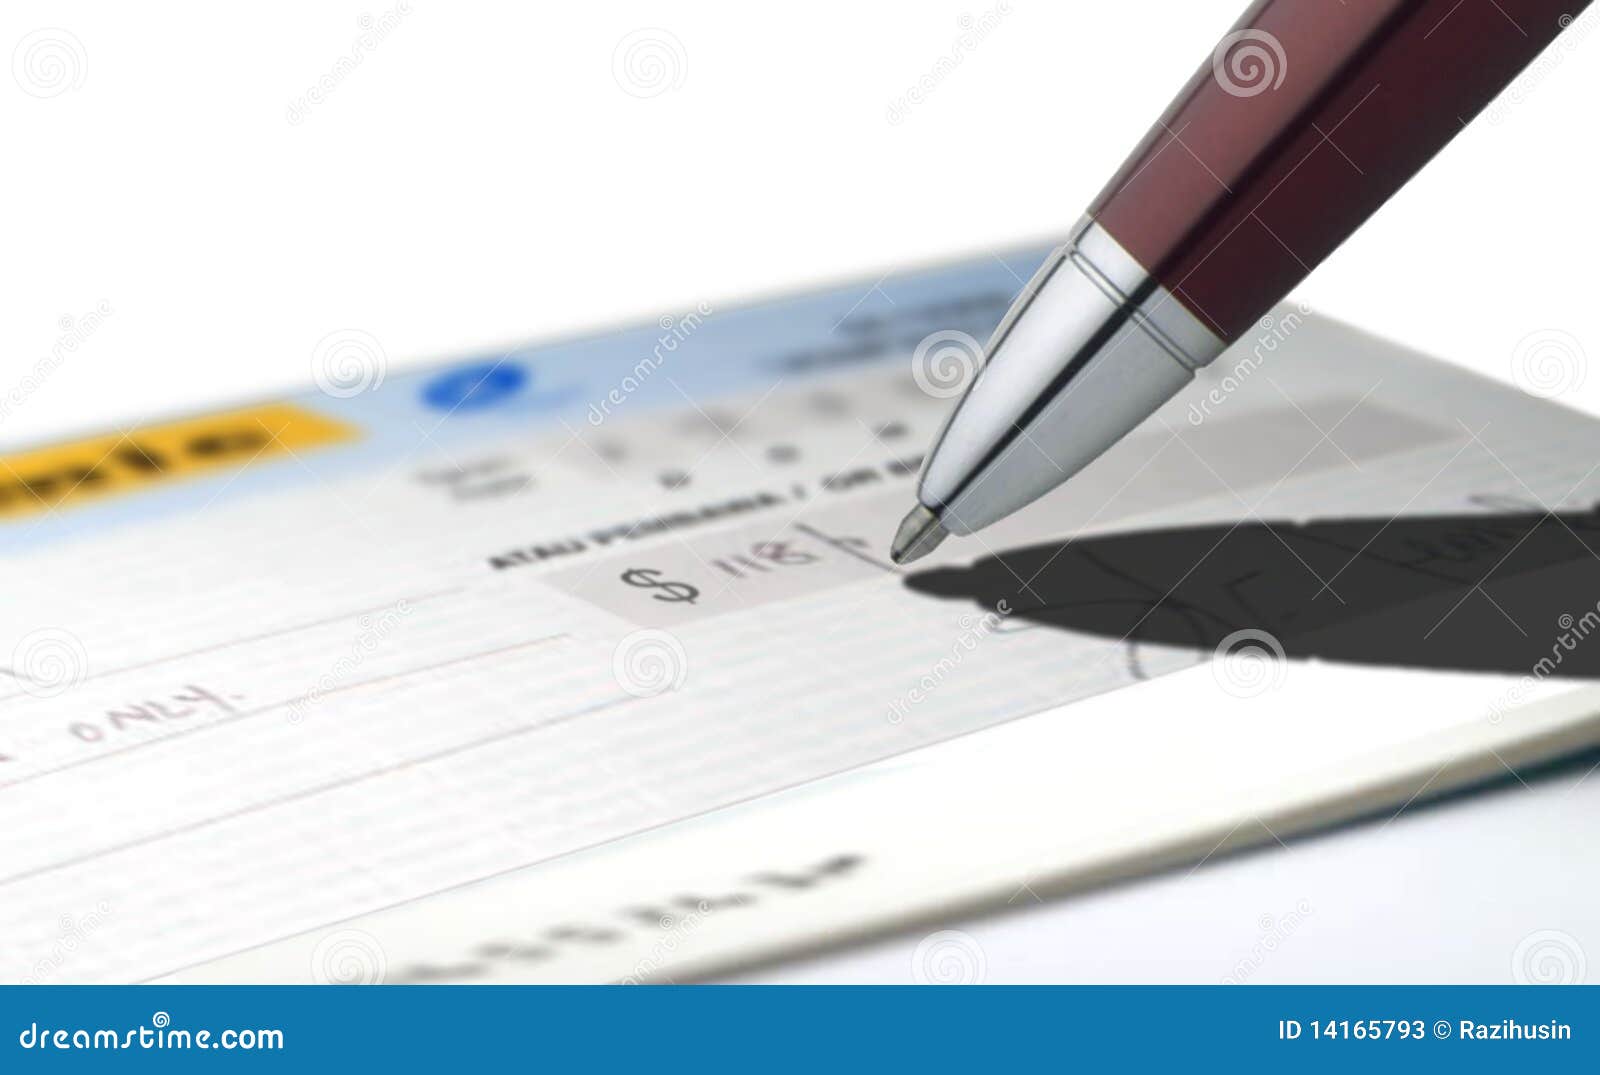 8 Loan Cheque Photos - Free & Royalty-Free Stock Photos from